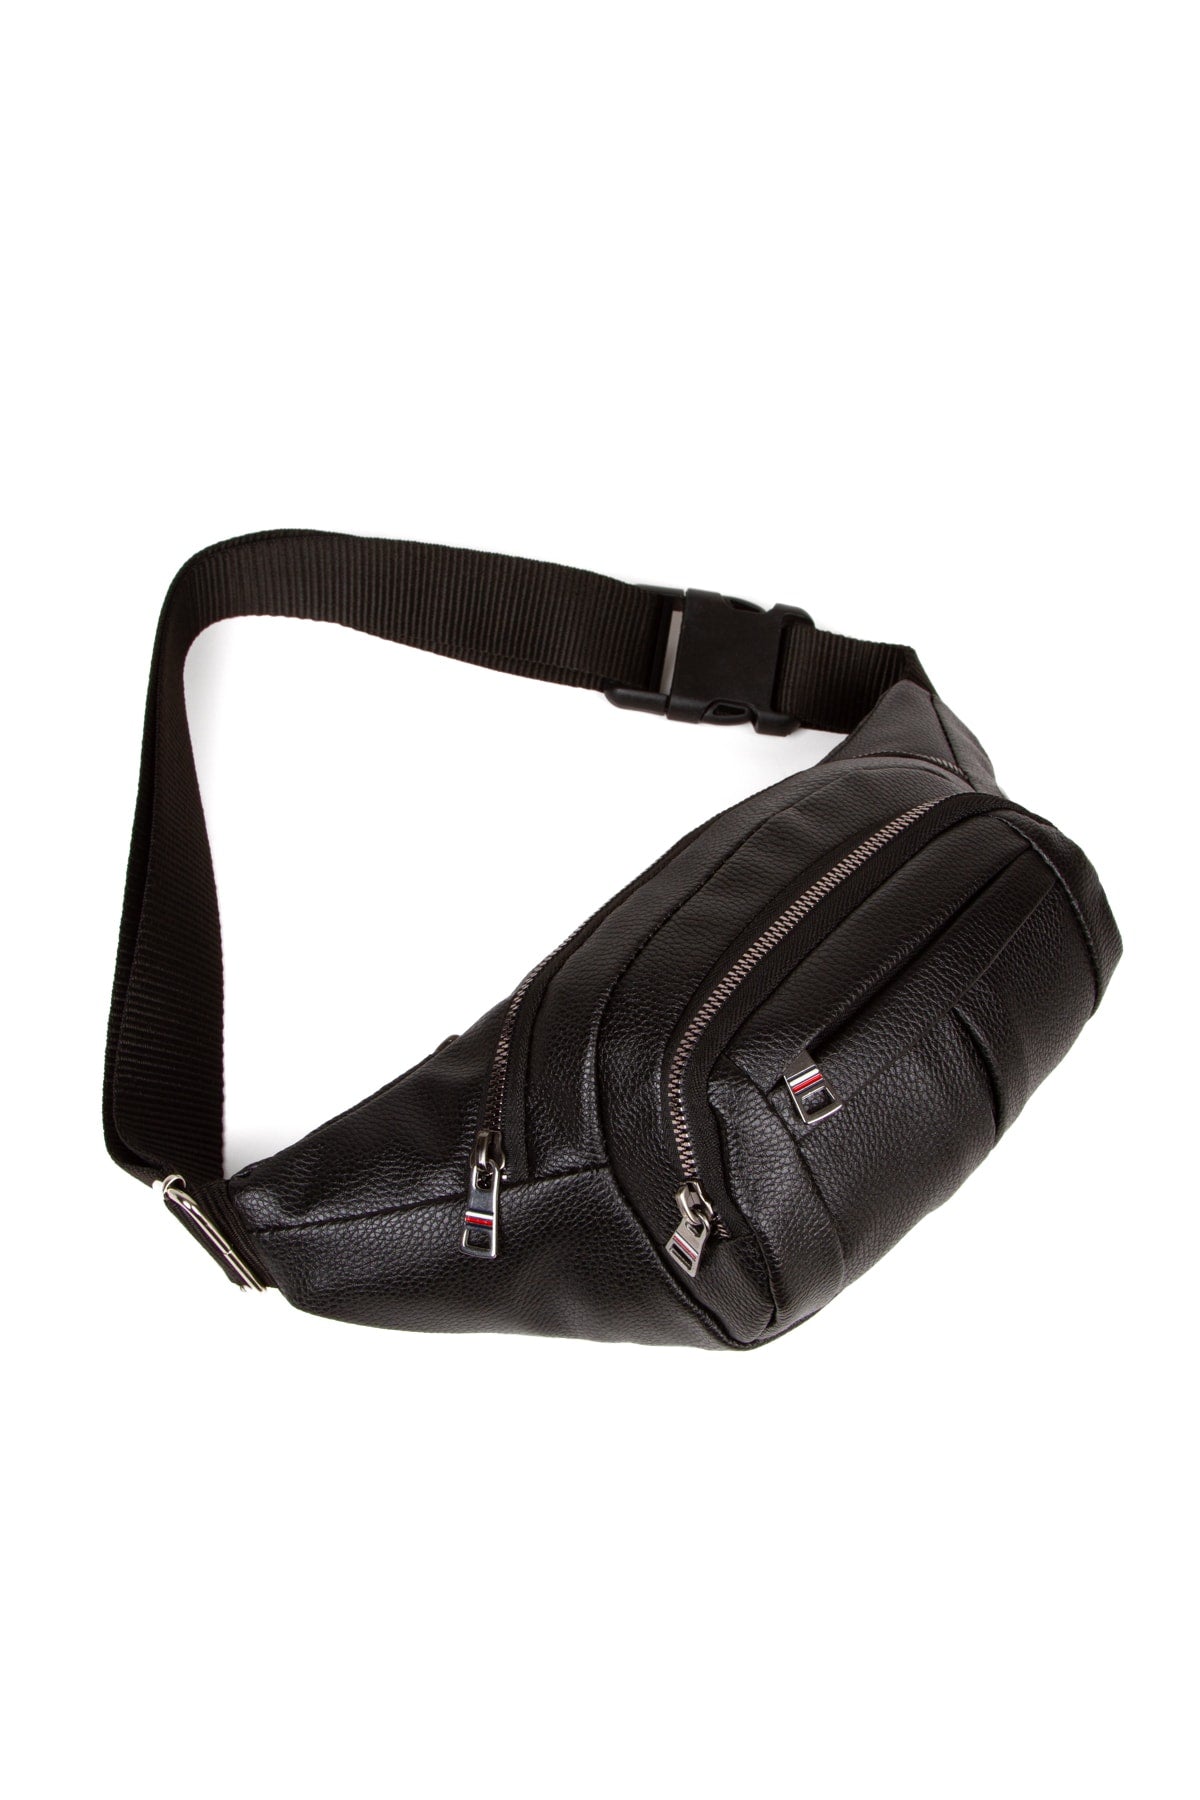 Men's Leather Headphone Outlet Waterproof Cross Shoulder And Waist Bag (Daily Use Black Color)